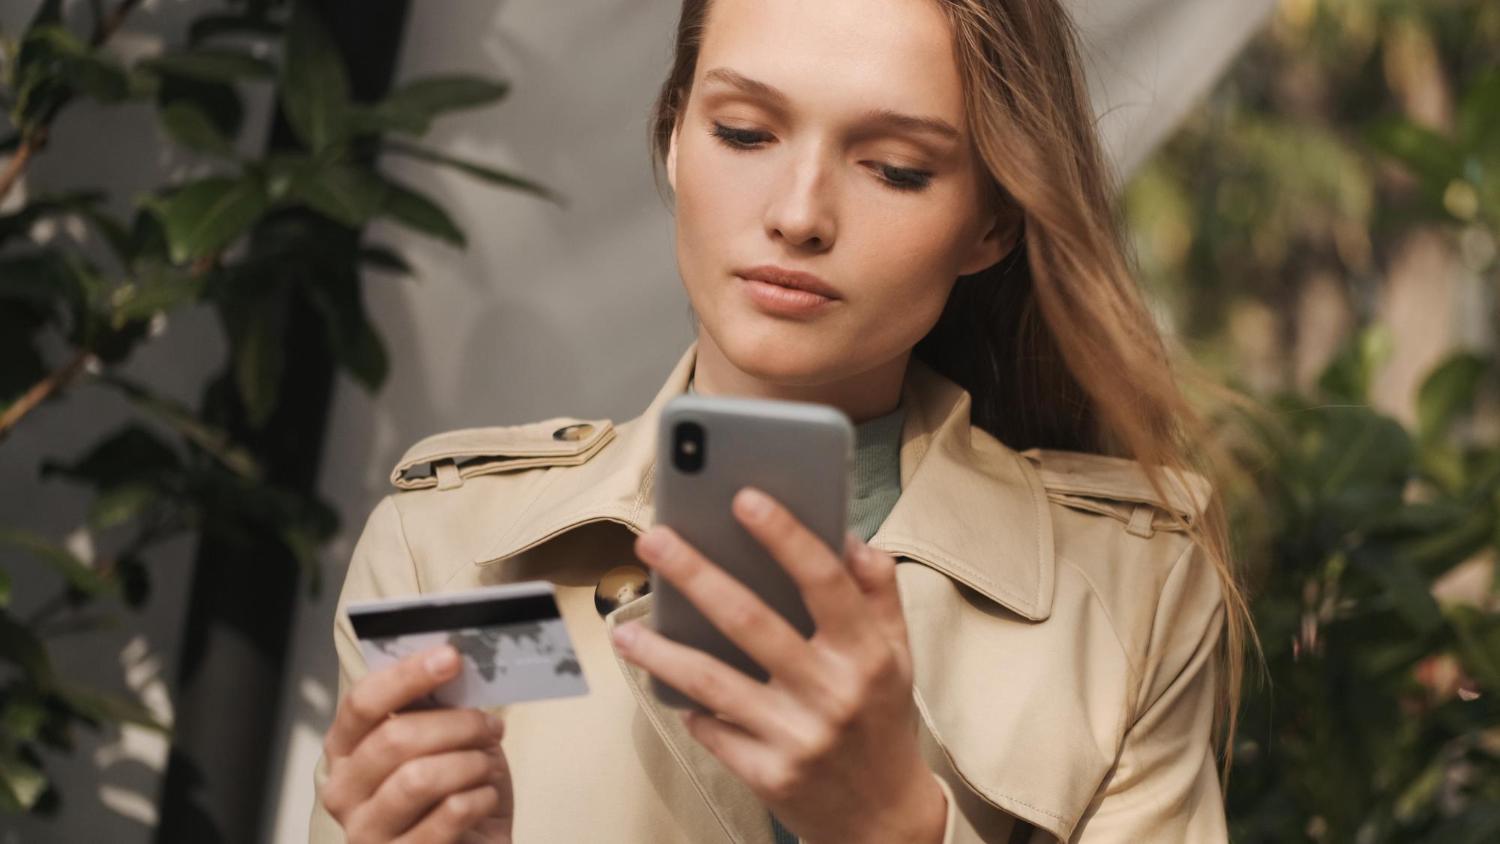 young woman using banking app on her mobile phone and keeping a credit card in her hand